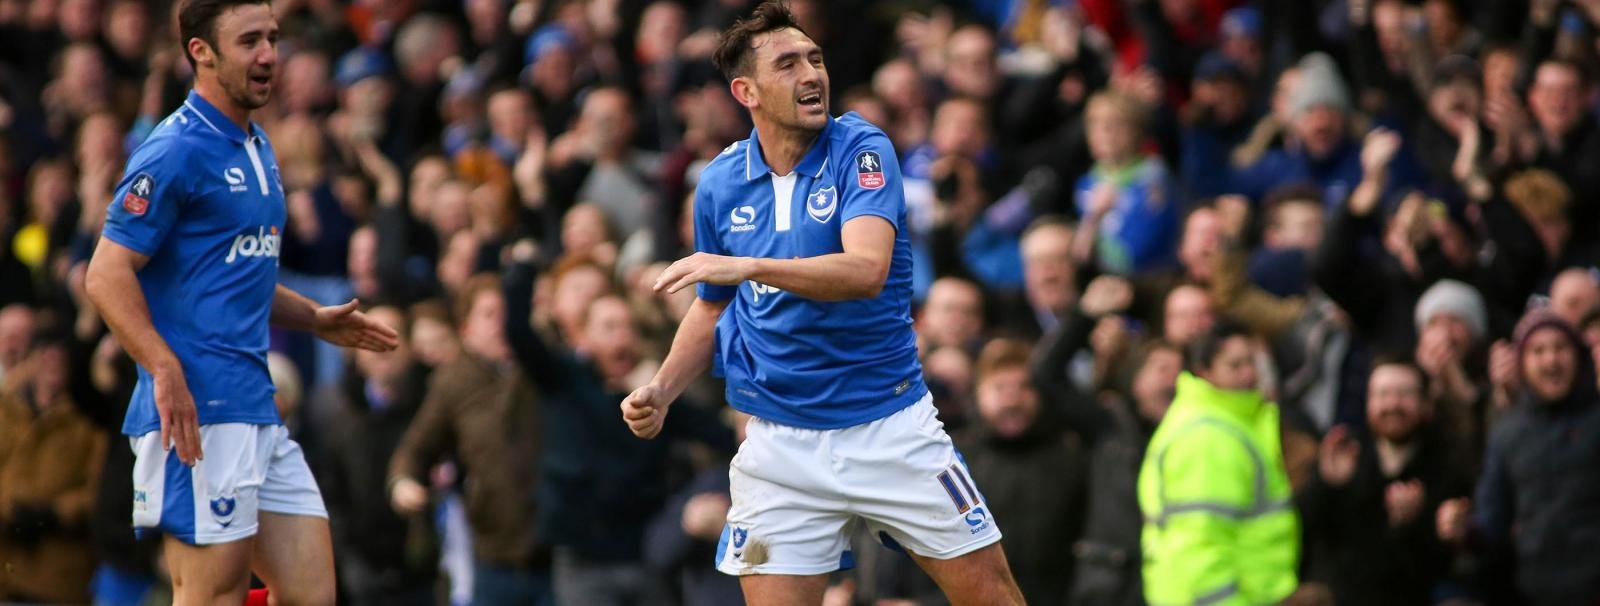 Pompey have the quality to deal without the suspended Gary Roberts